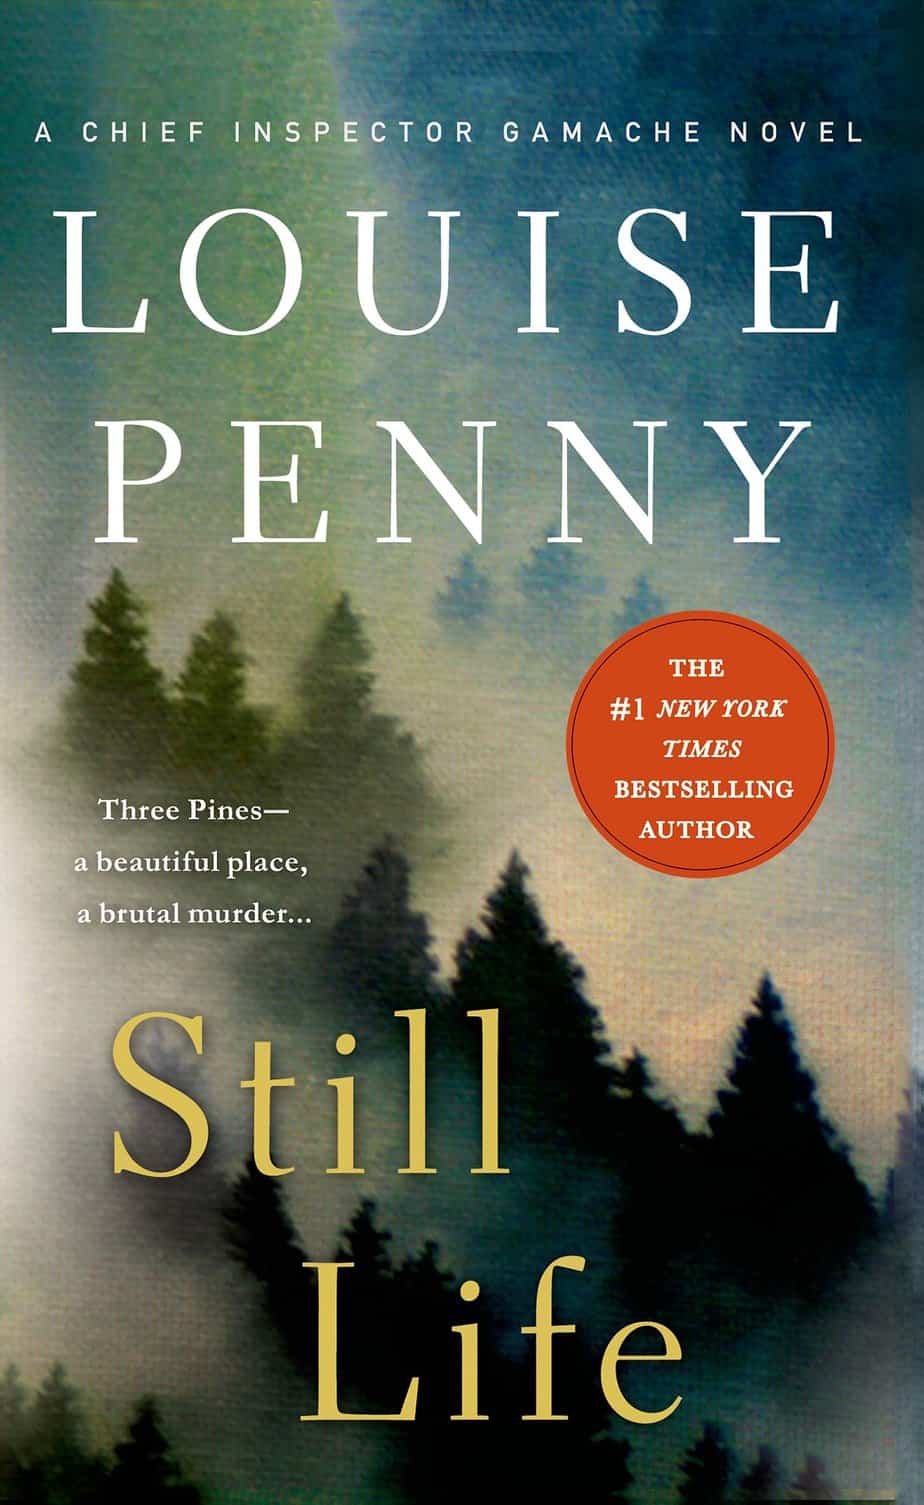  Louise Penny: books, biography, latest update